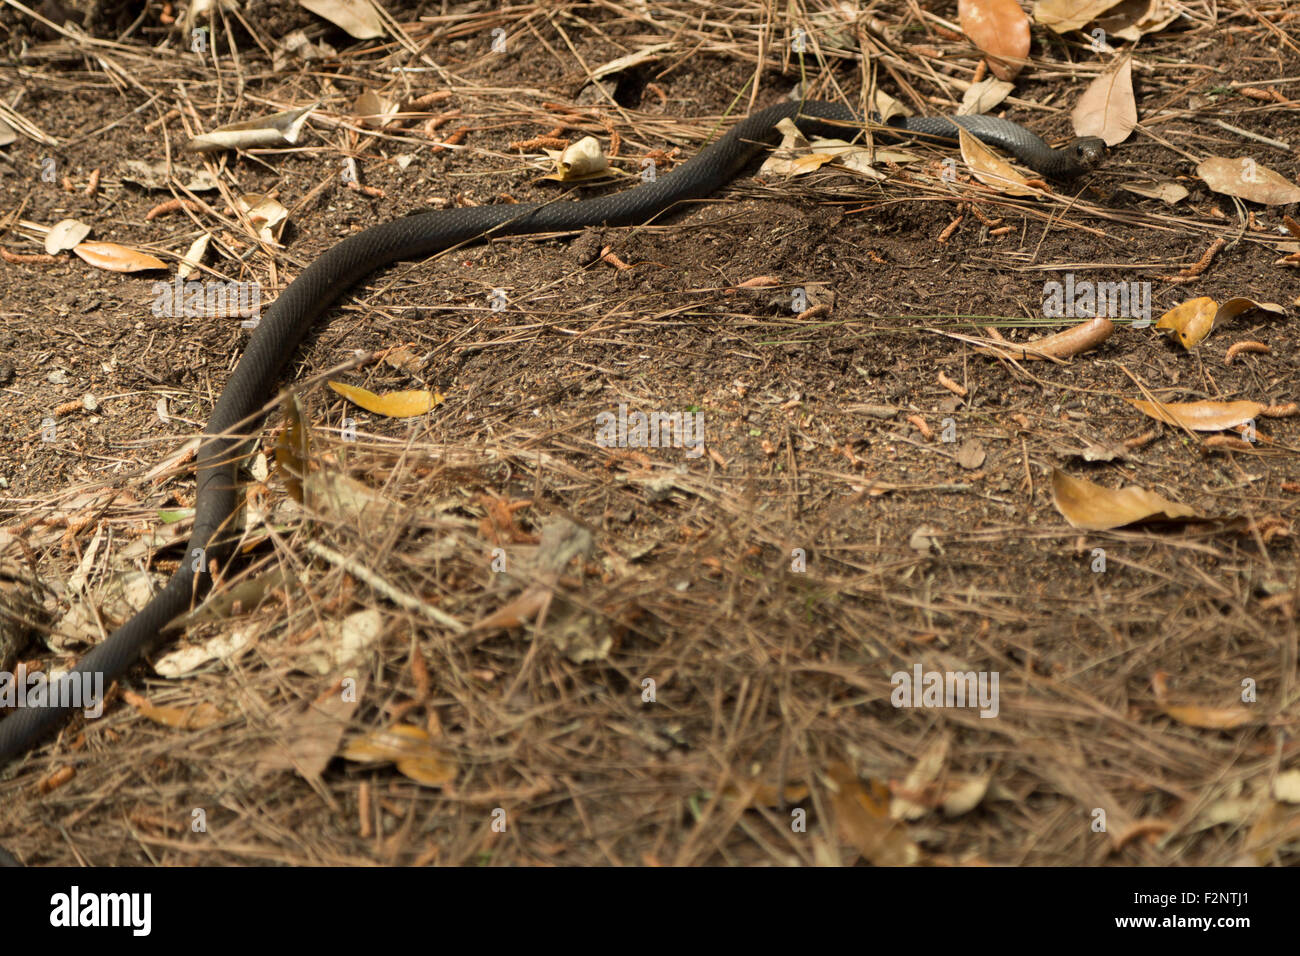 A photograph of black coachwhip snake, which was spotted near Savannah in Georgia, USA. Stock Photo